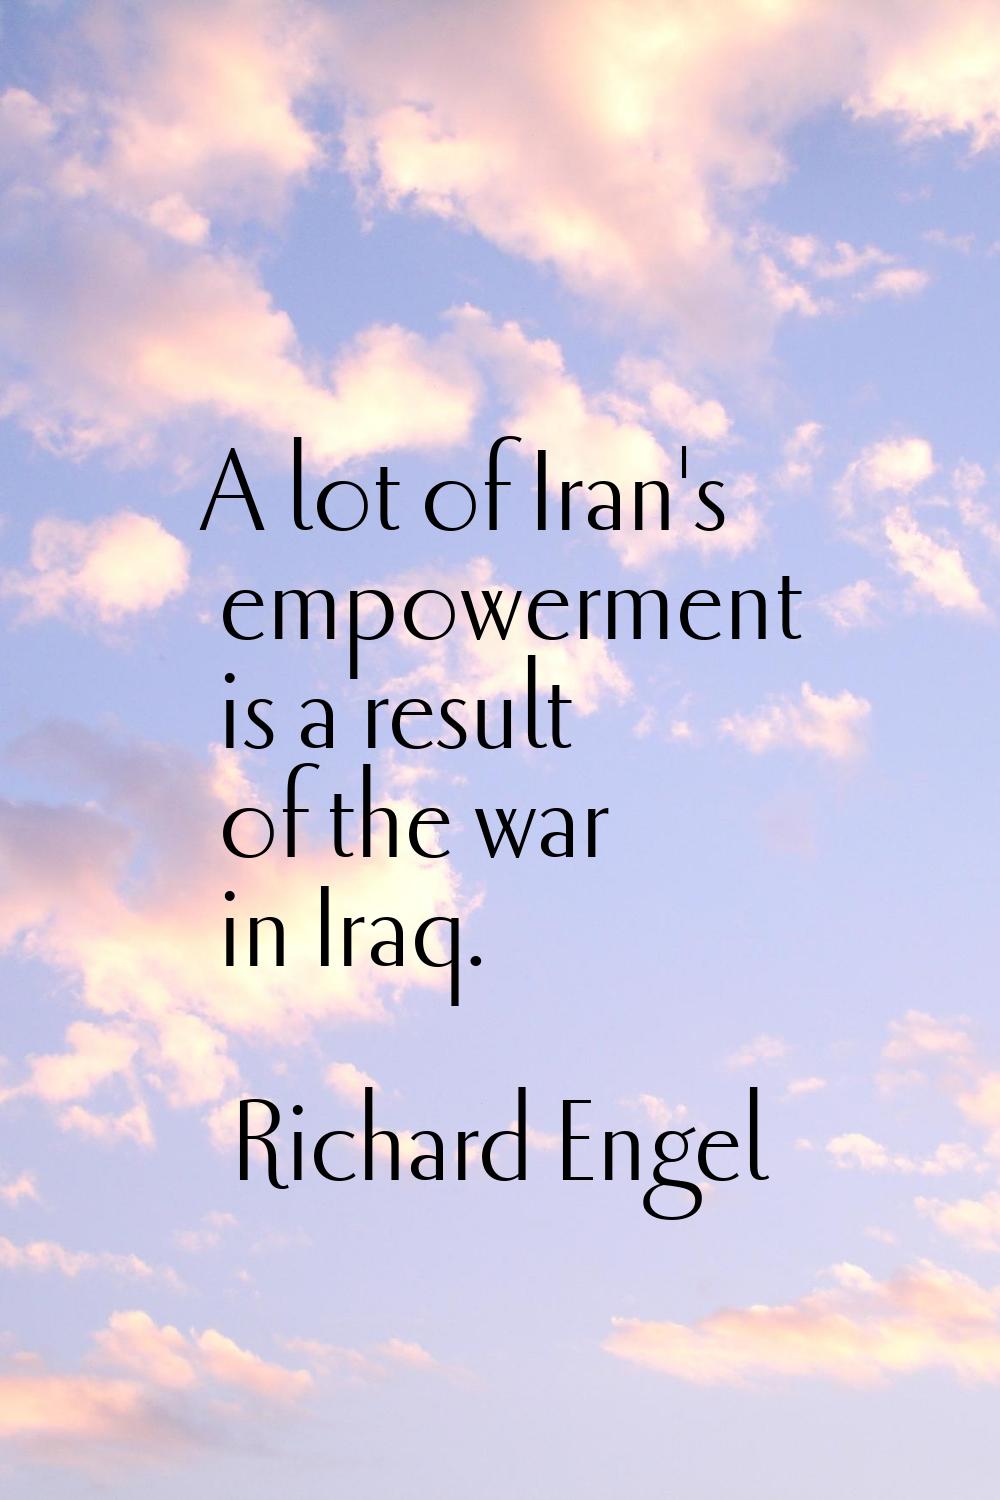 A lot of Iran's empowerment is a result of the war in Iraq.